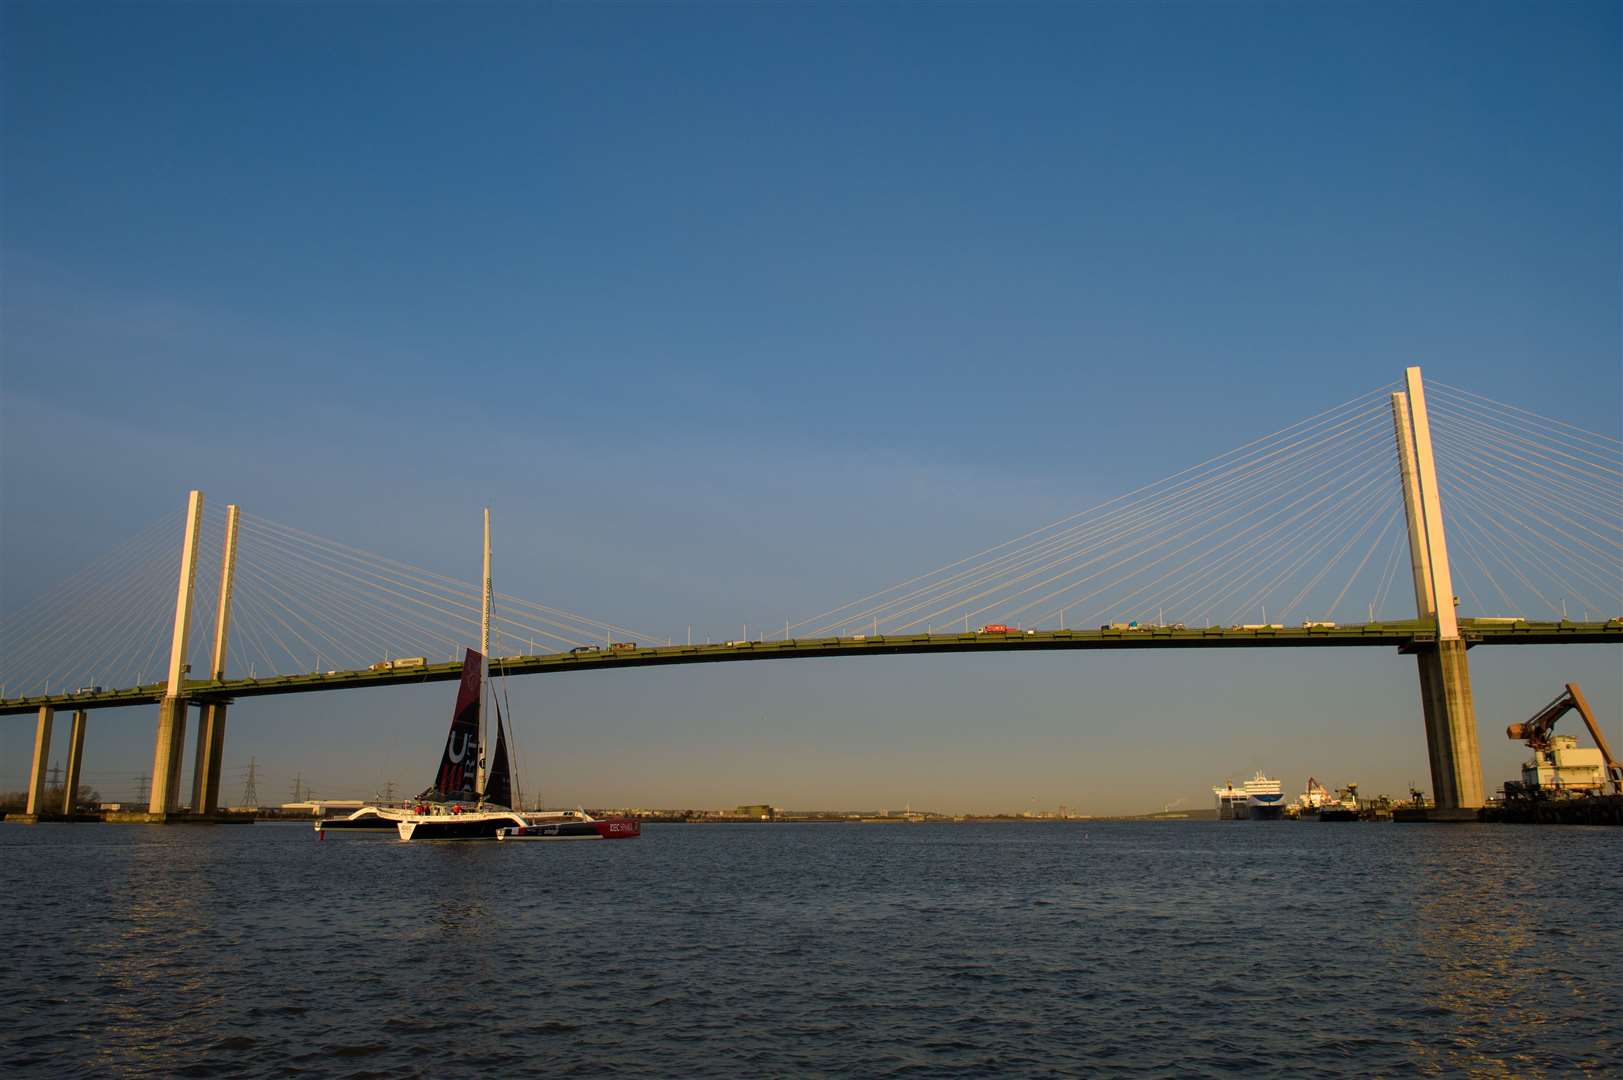 The Dartford Crossing connects Kent and Essex. Photo: Anthony Upton/Alea